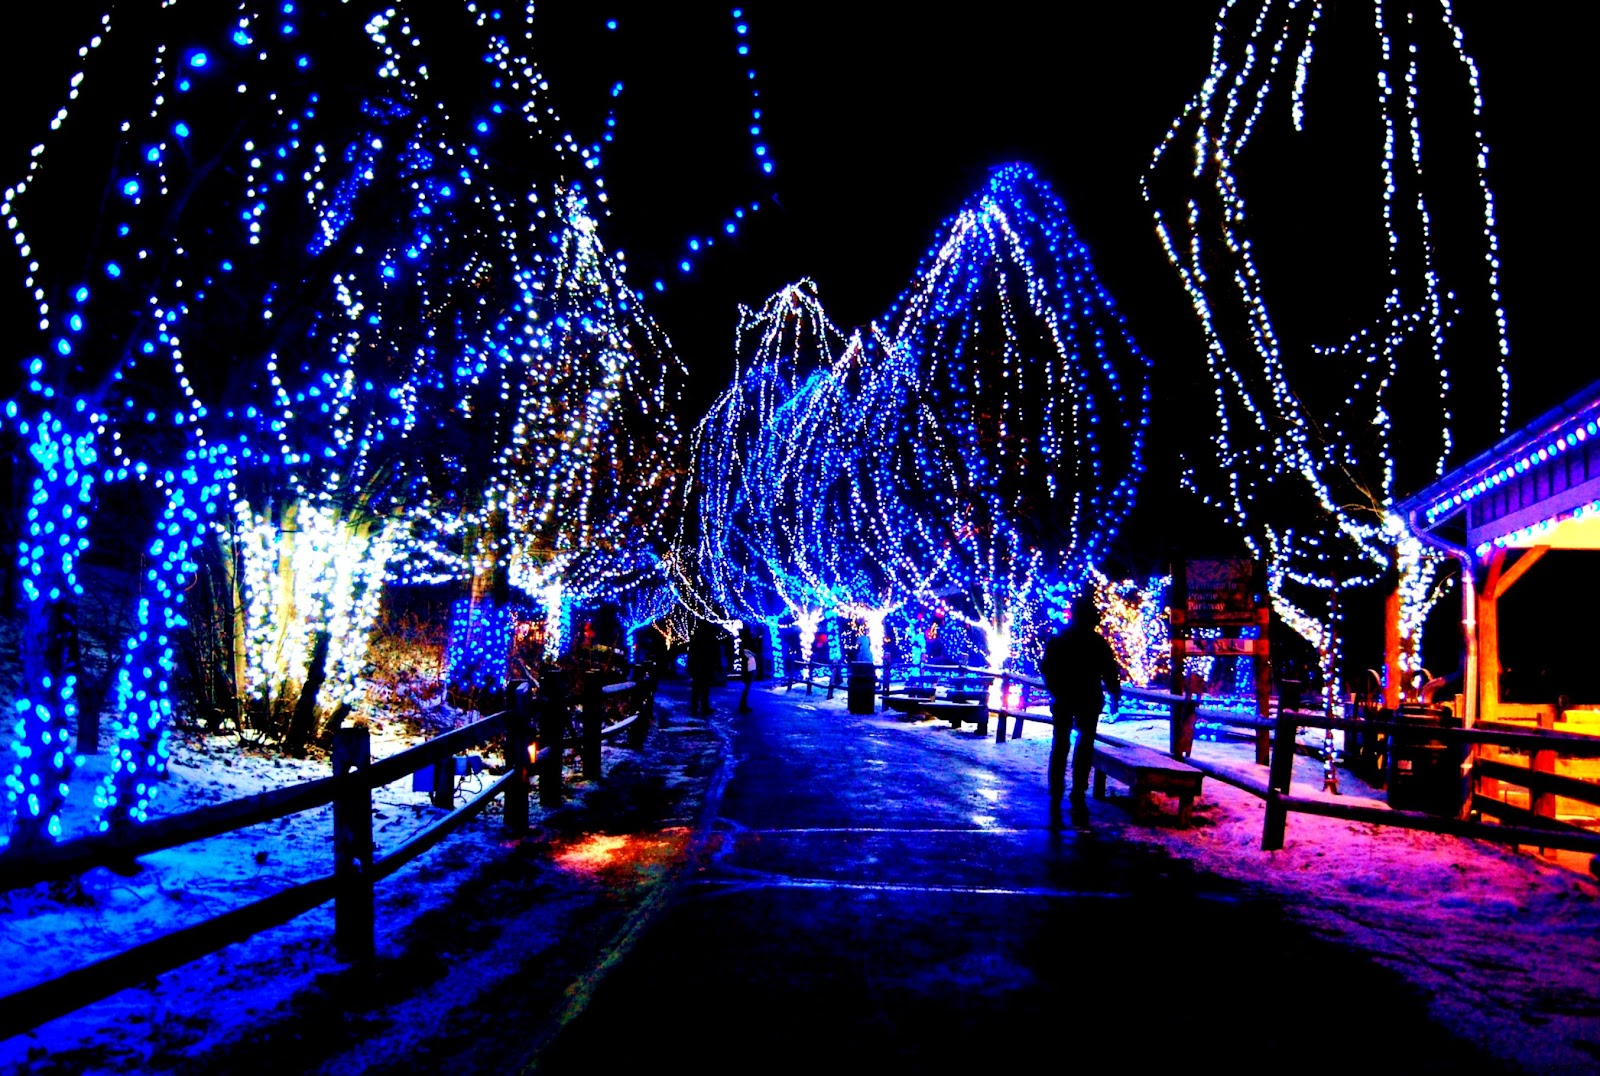  Animated  Christmas  Lights  For Desktop  Best HD Wallpapers 